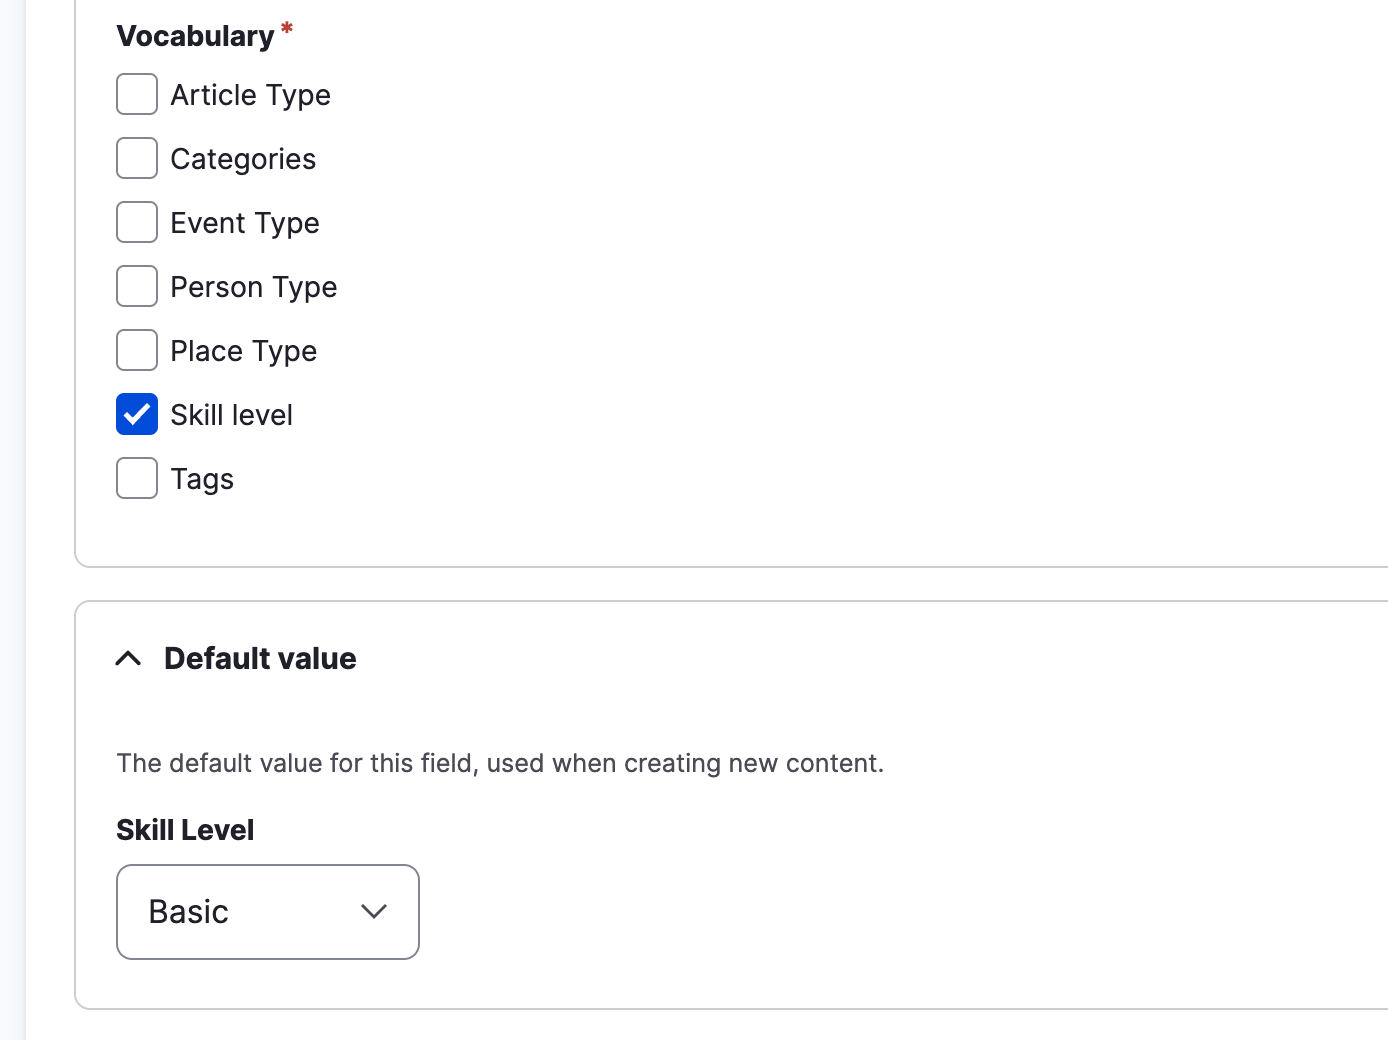 Configuration options for our Skill Level field, including a default value